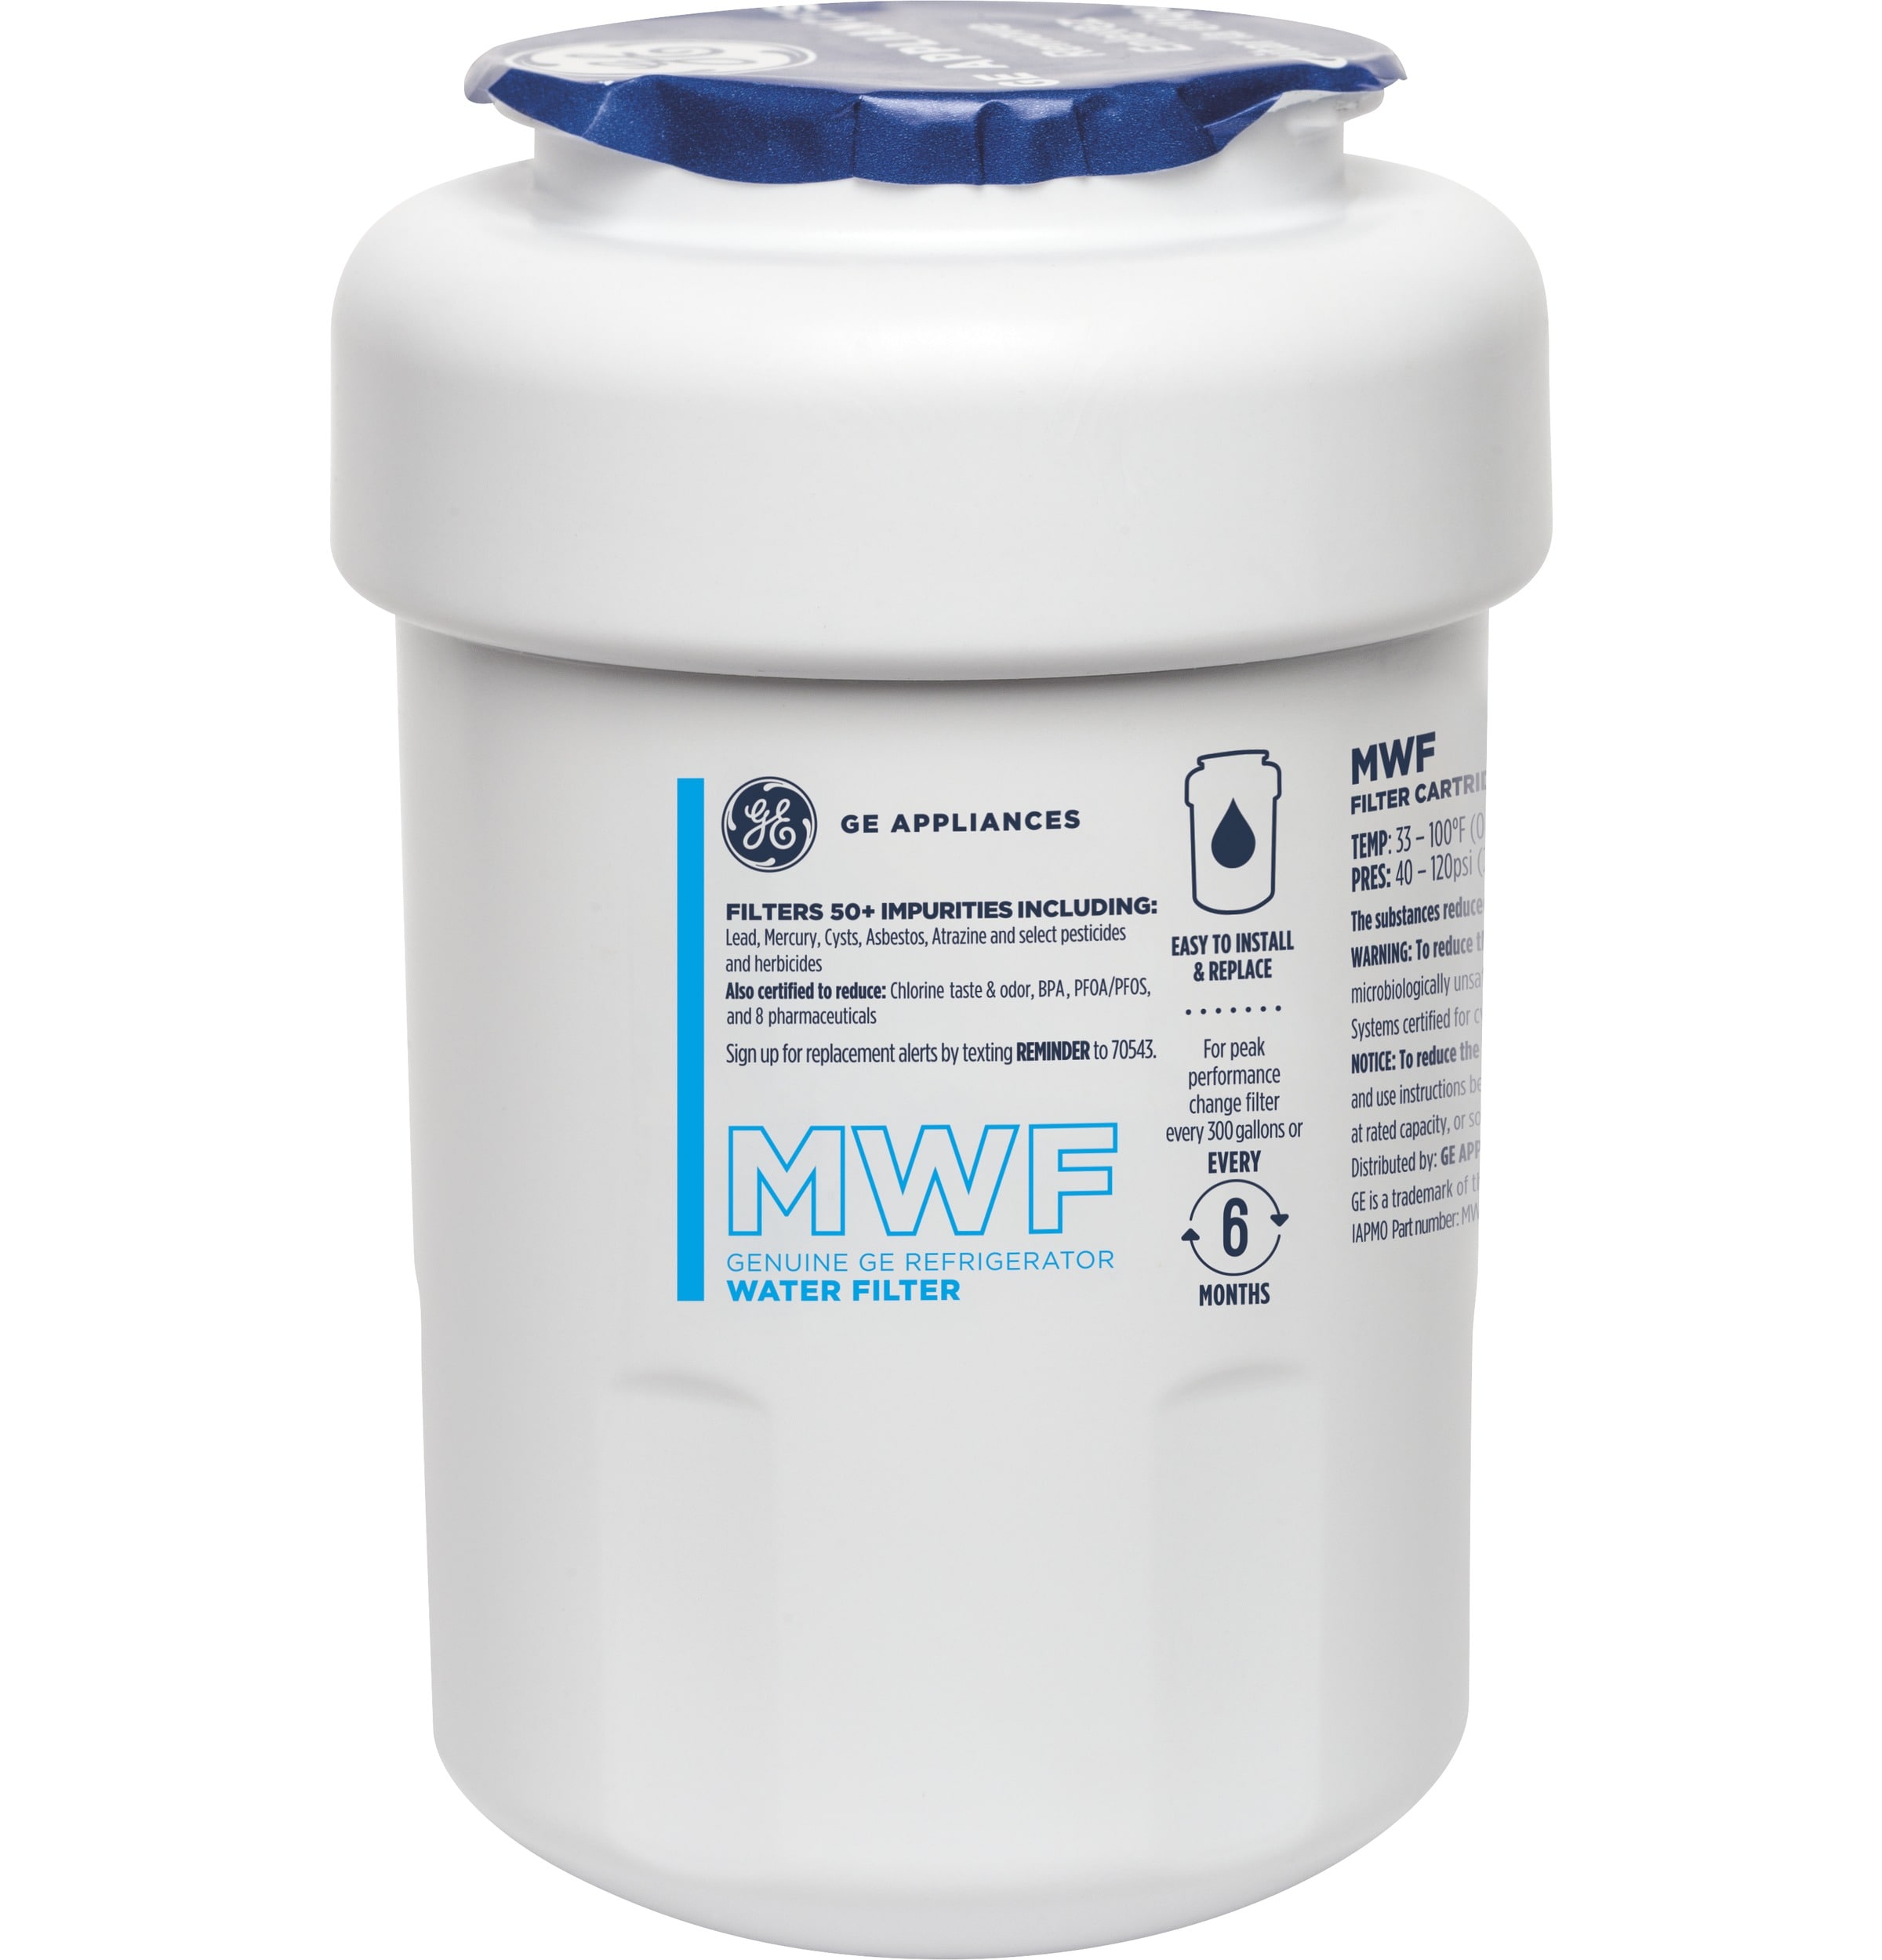 GE Appliances MWF Refrigerator Water Filter Cartridge NEW and SEALED! 